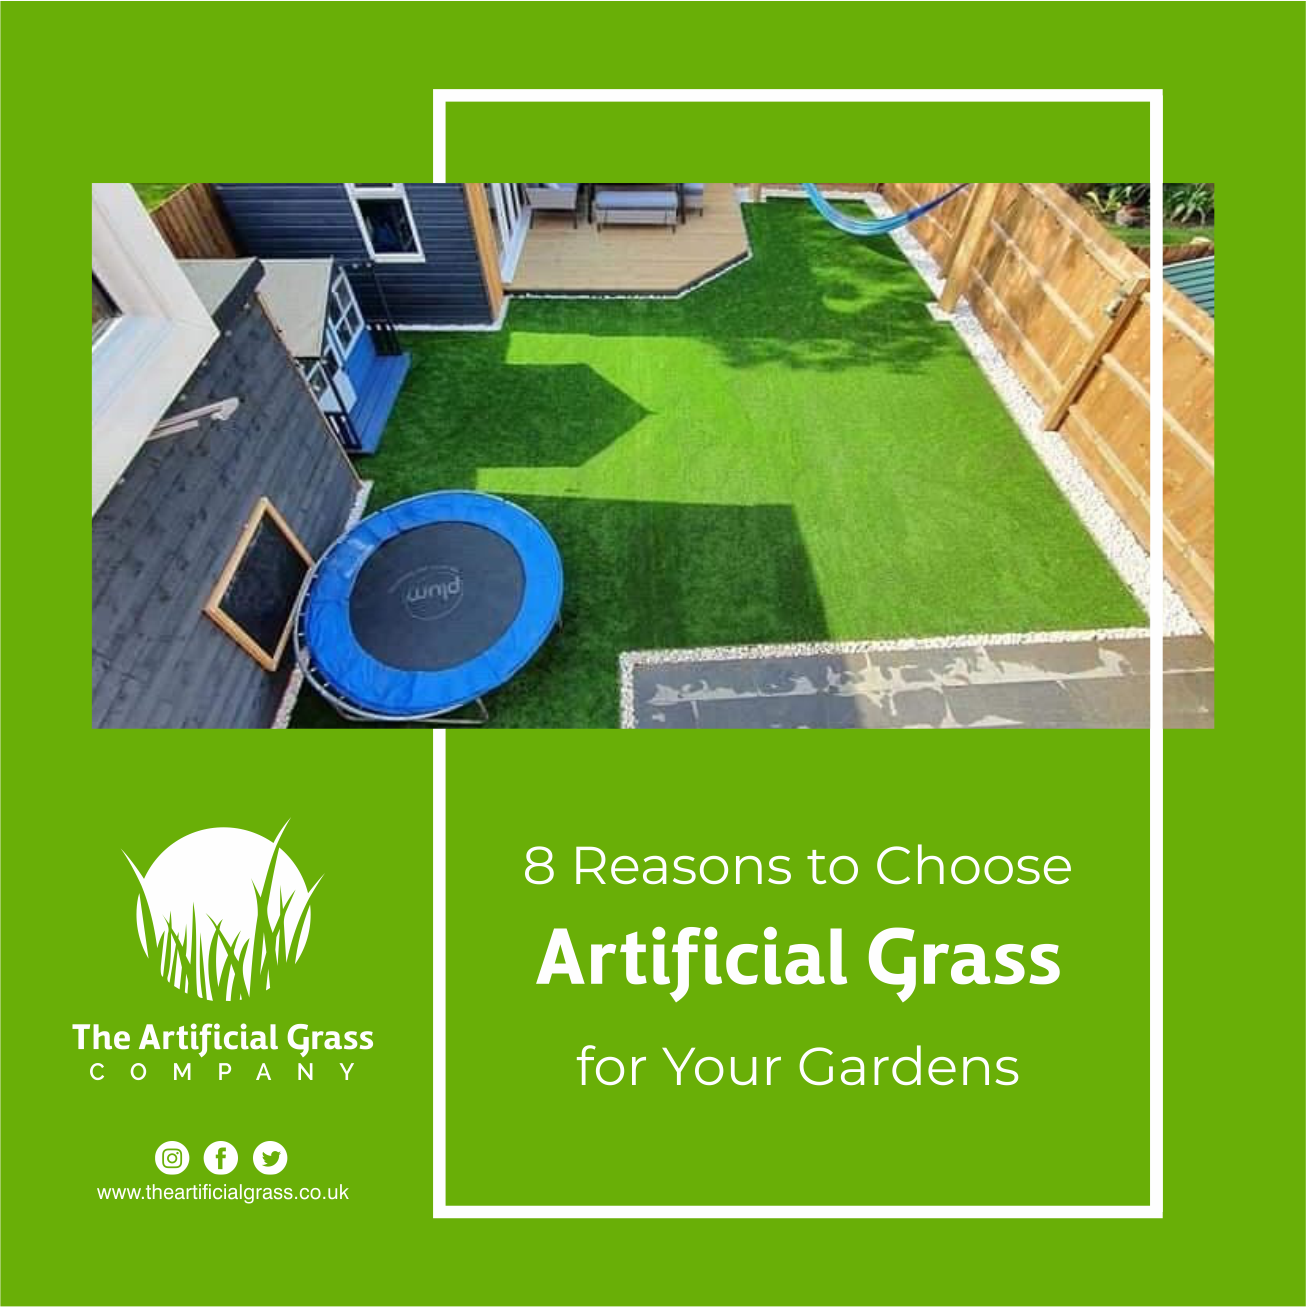 is artificial grass toxic to dogs